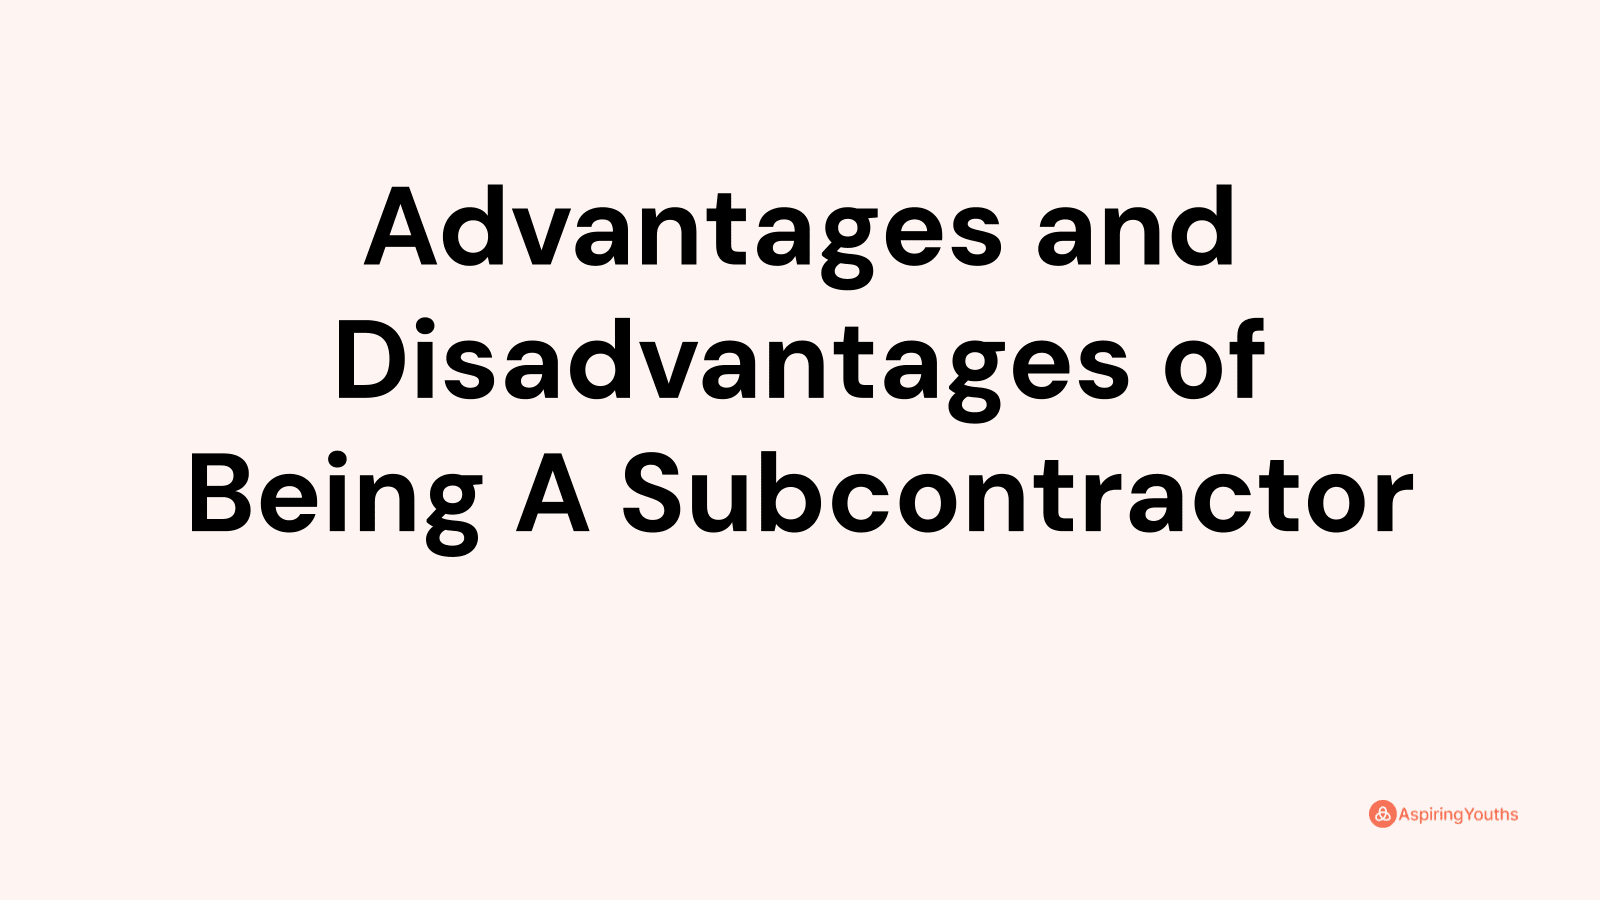 Advantages and disadvantages of Being A Subcontractor